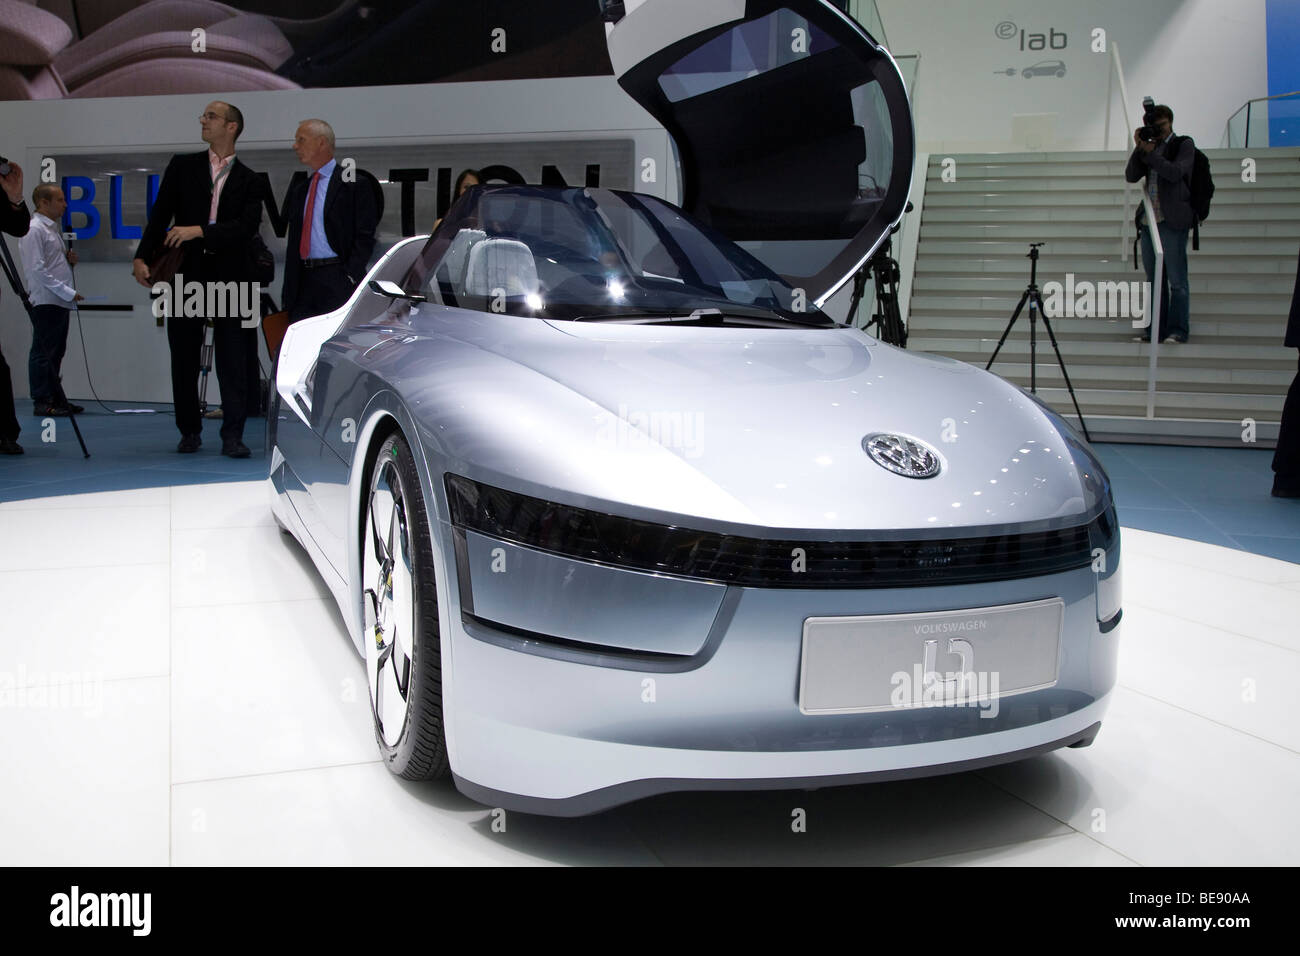 Volkswagen 170 mpg tandem diesel hybrid two-seater L1. At a European motor show. Stock Photo